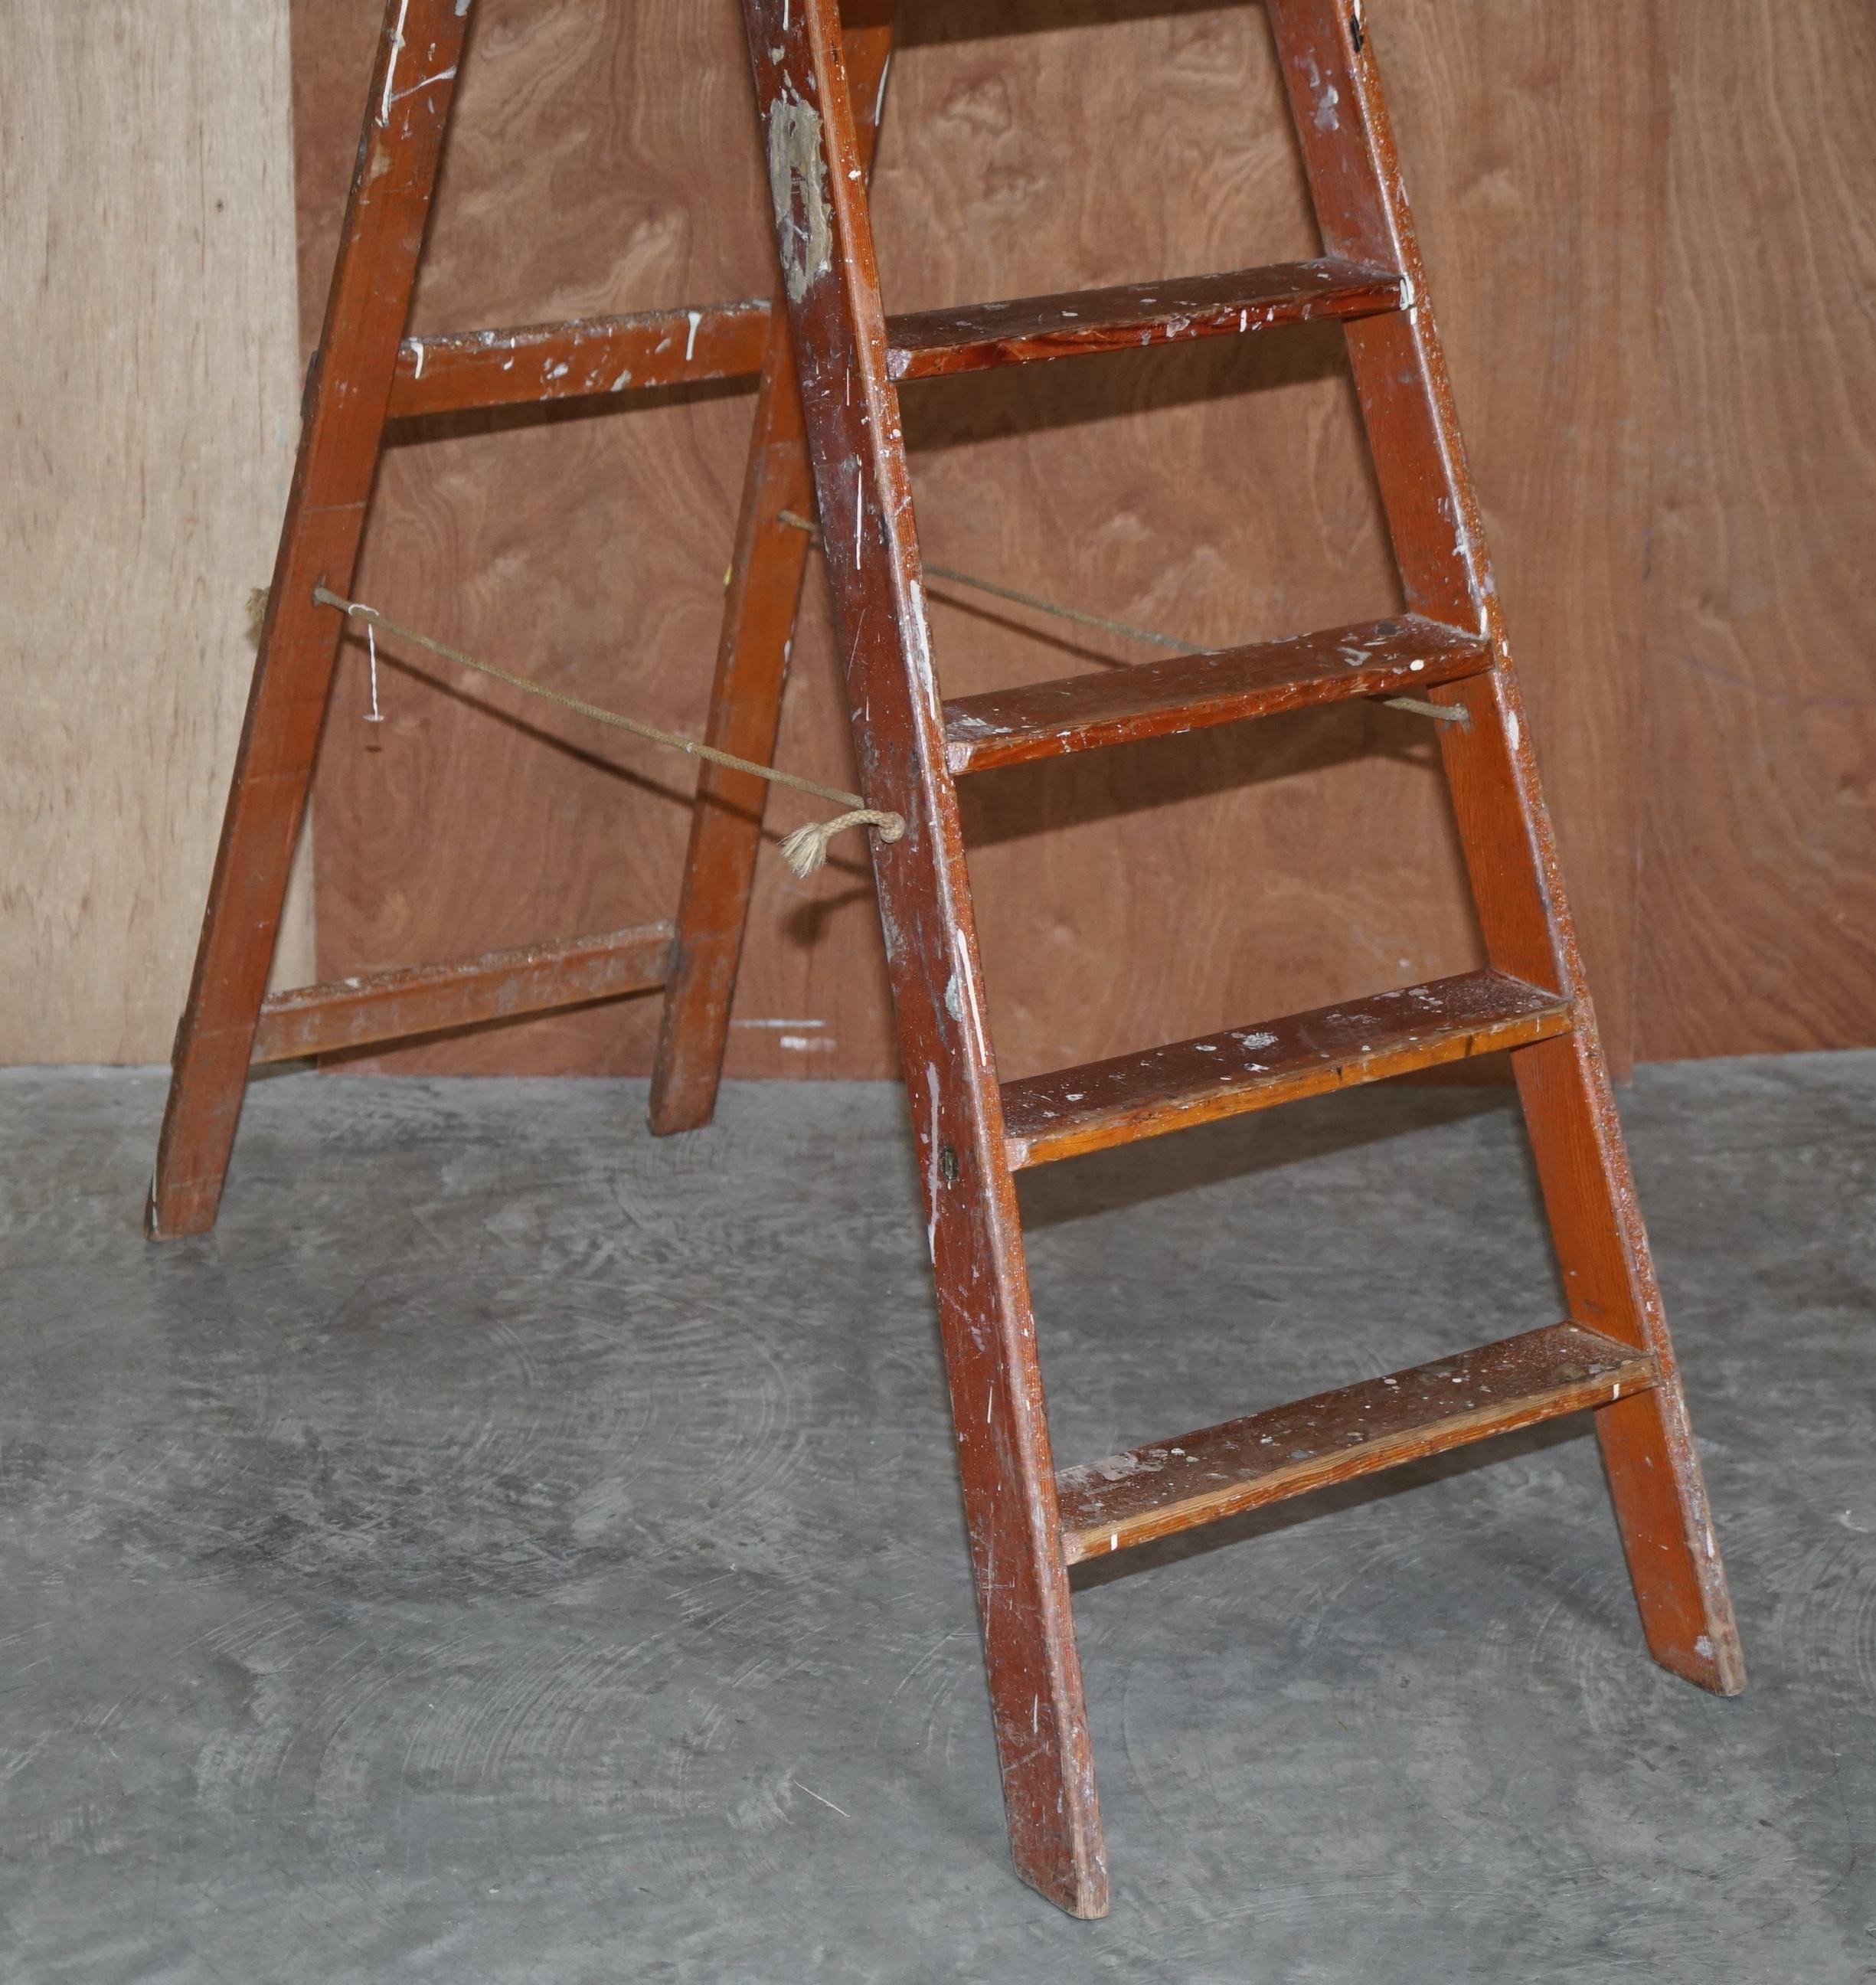 We are delighted to offer for sale this lovely original pine library steps or ladder

A good looking and decorative piece, I have seen these with glass shelves fitted and upcycled to use as a bookcase or display table, or they can of course be